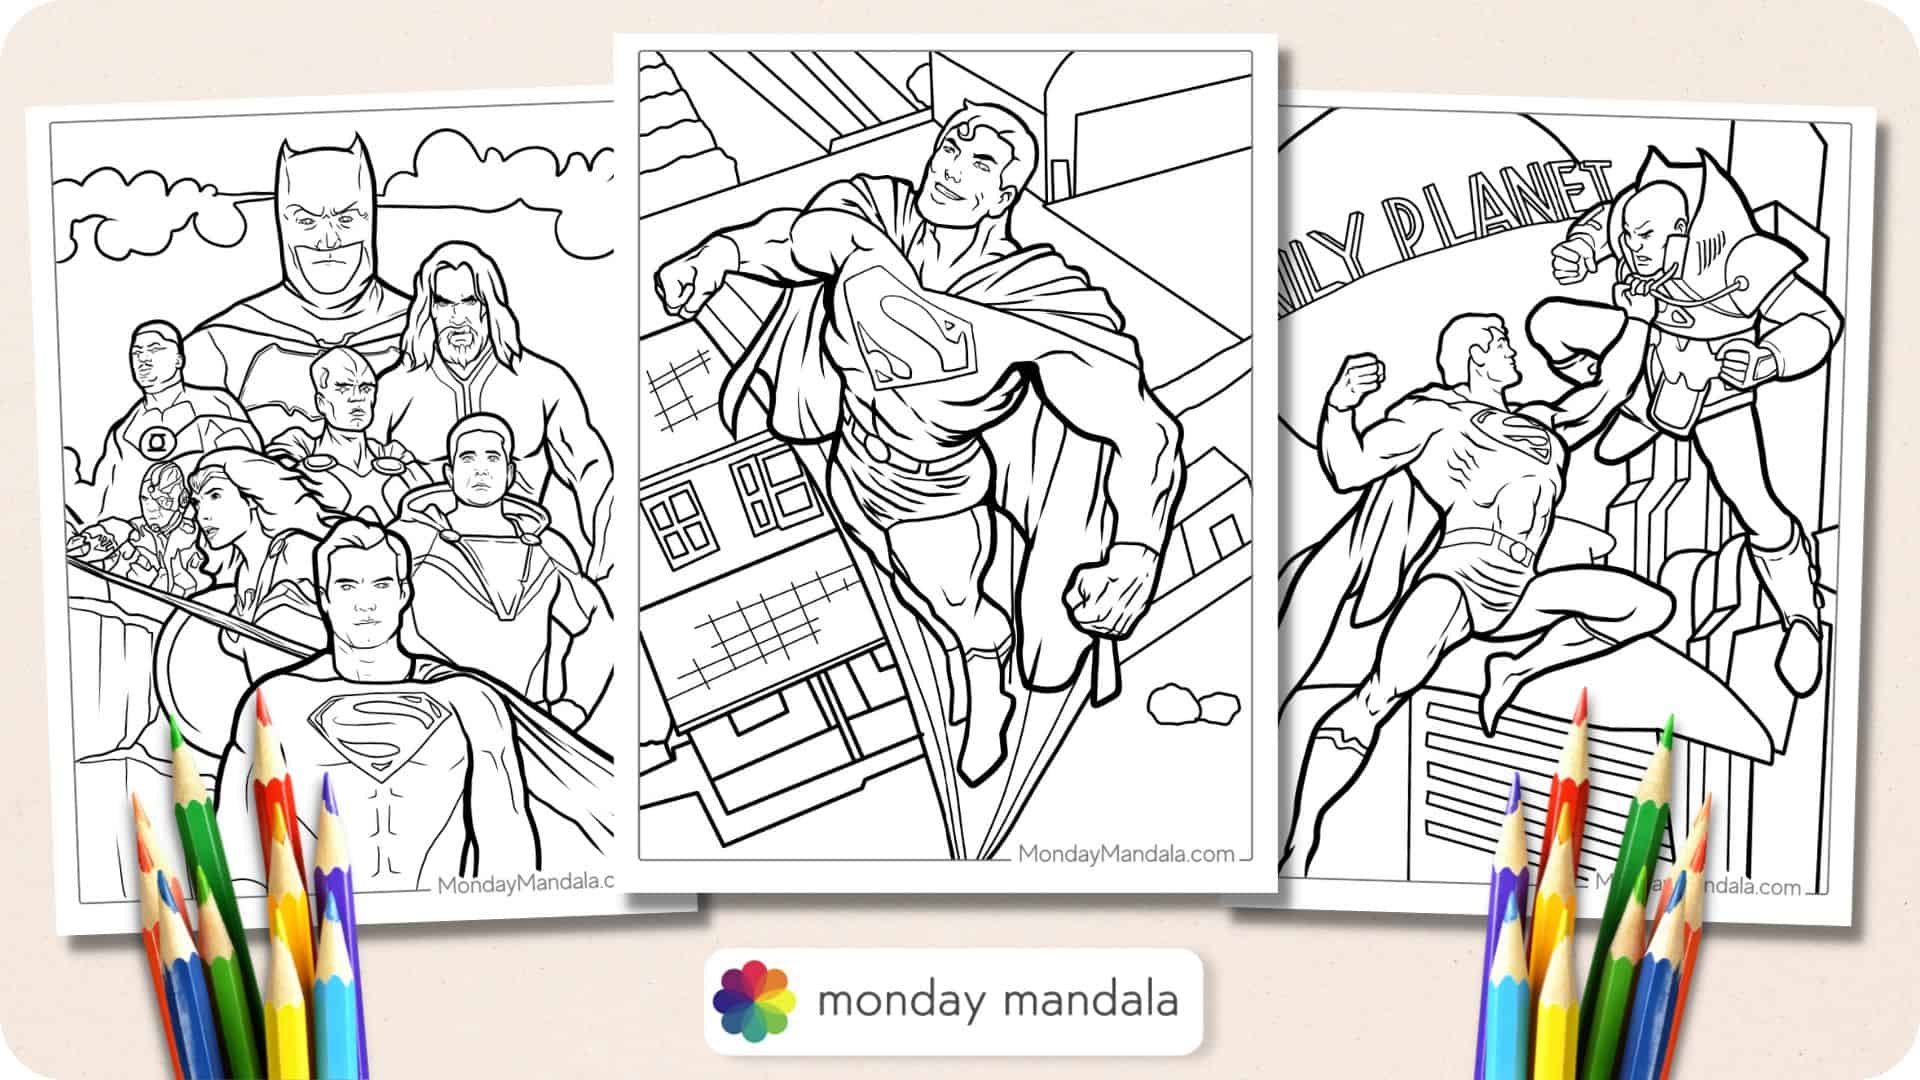 Superman coloring pages free pdf printables